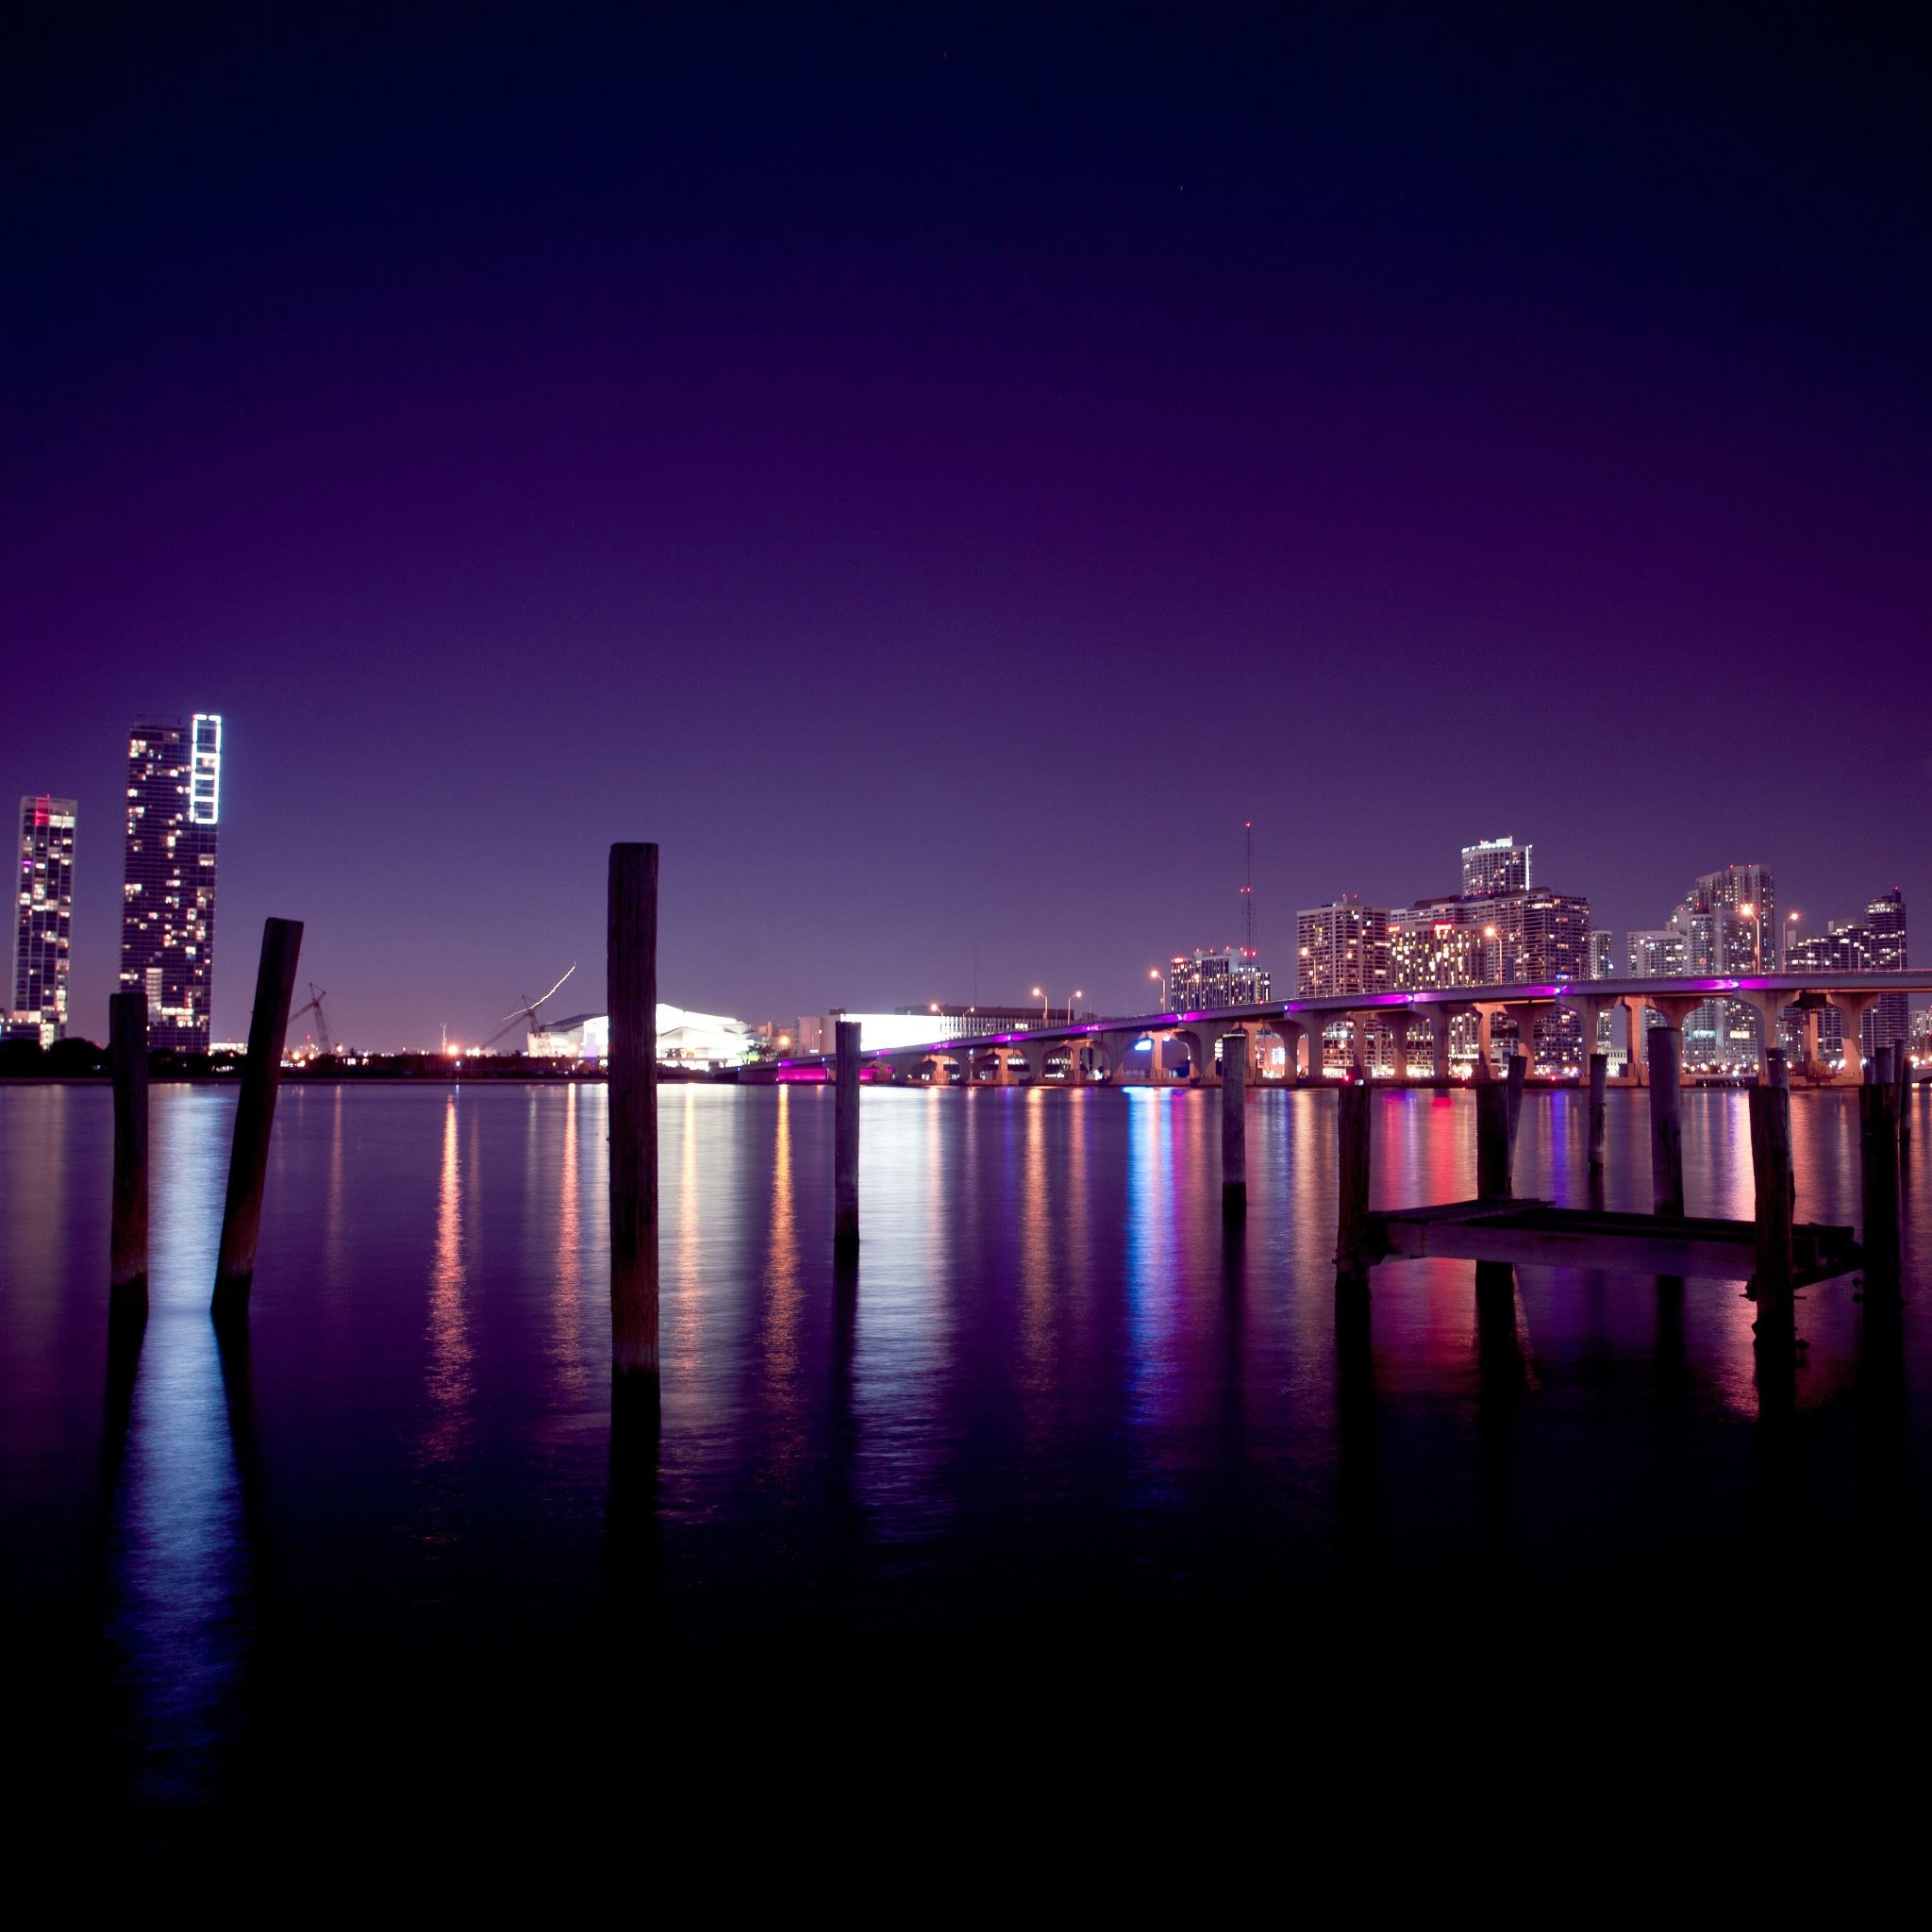 Waterfront City Night Scene Ipad Air Wallpapers Free Download